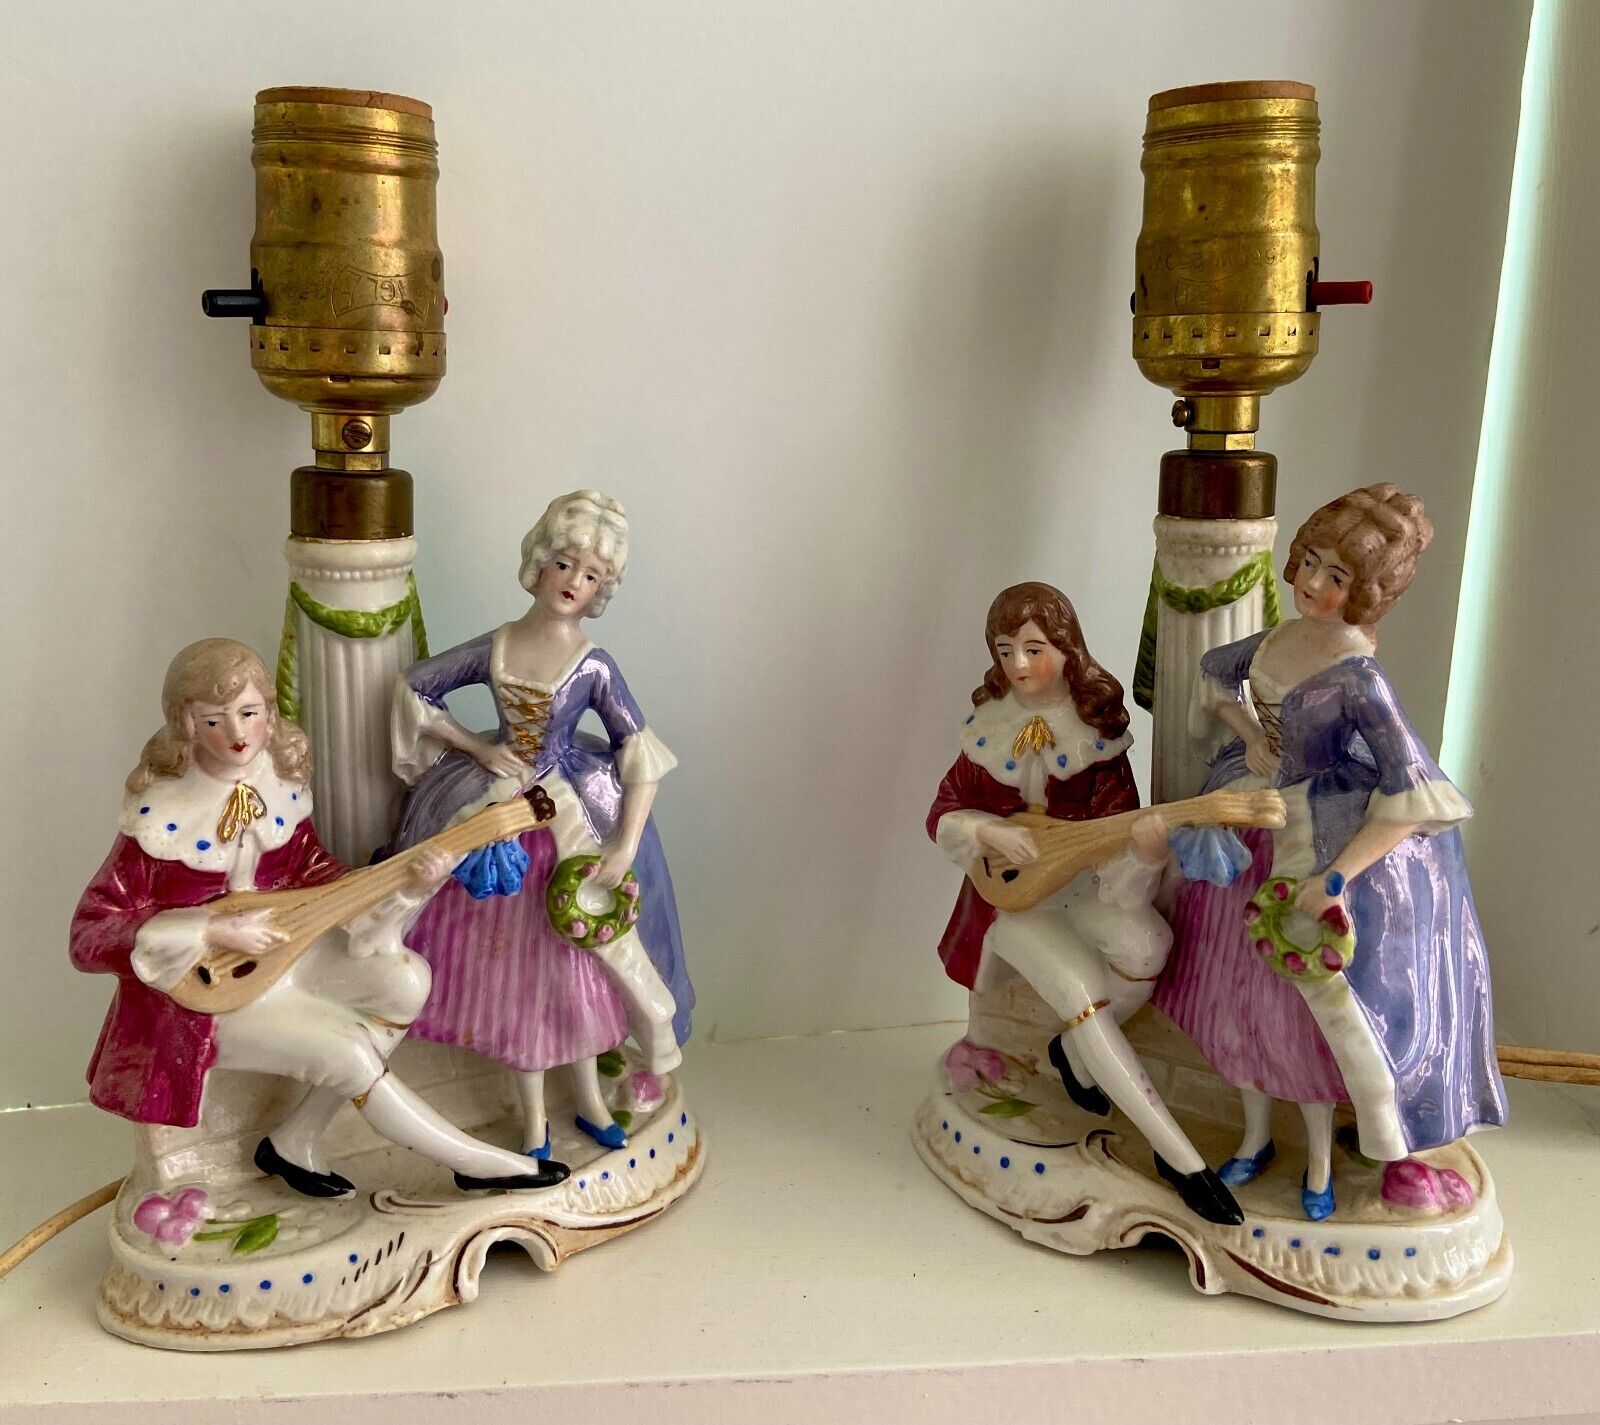 Antique Courting Couples German Porcelain (Two) Lamps M. Houlberg Figurines